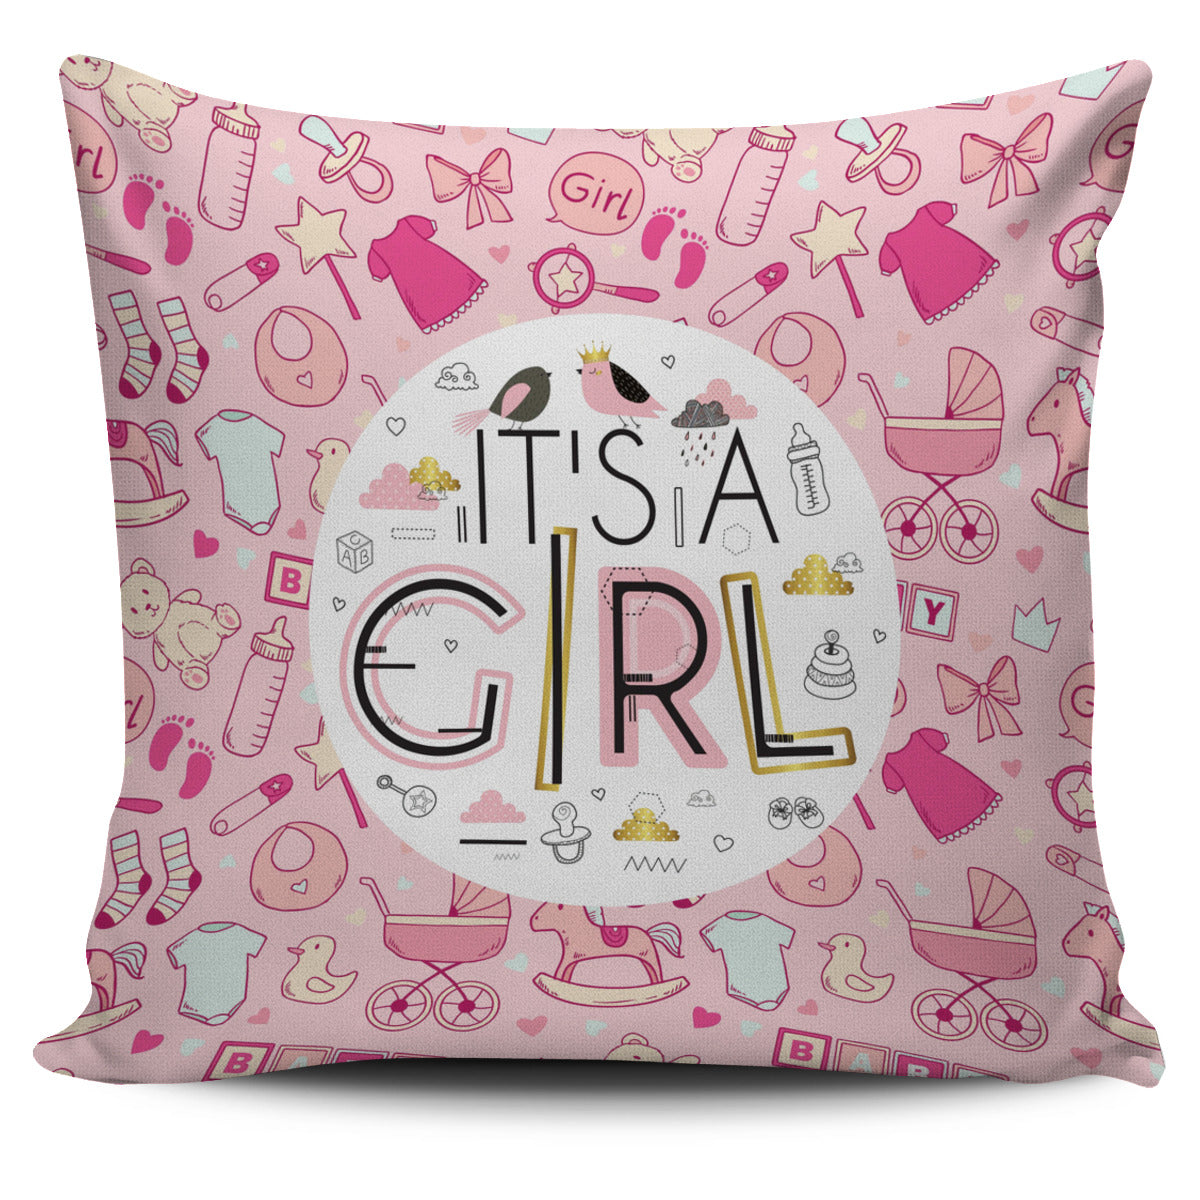 Gender Reveal Pillow Cover